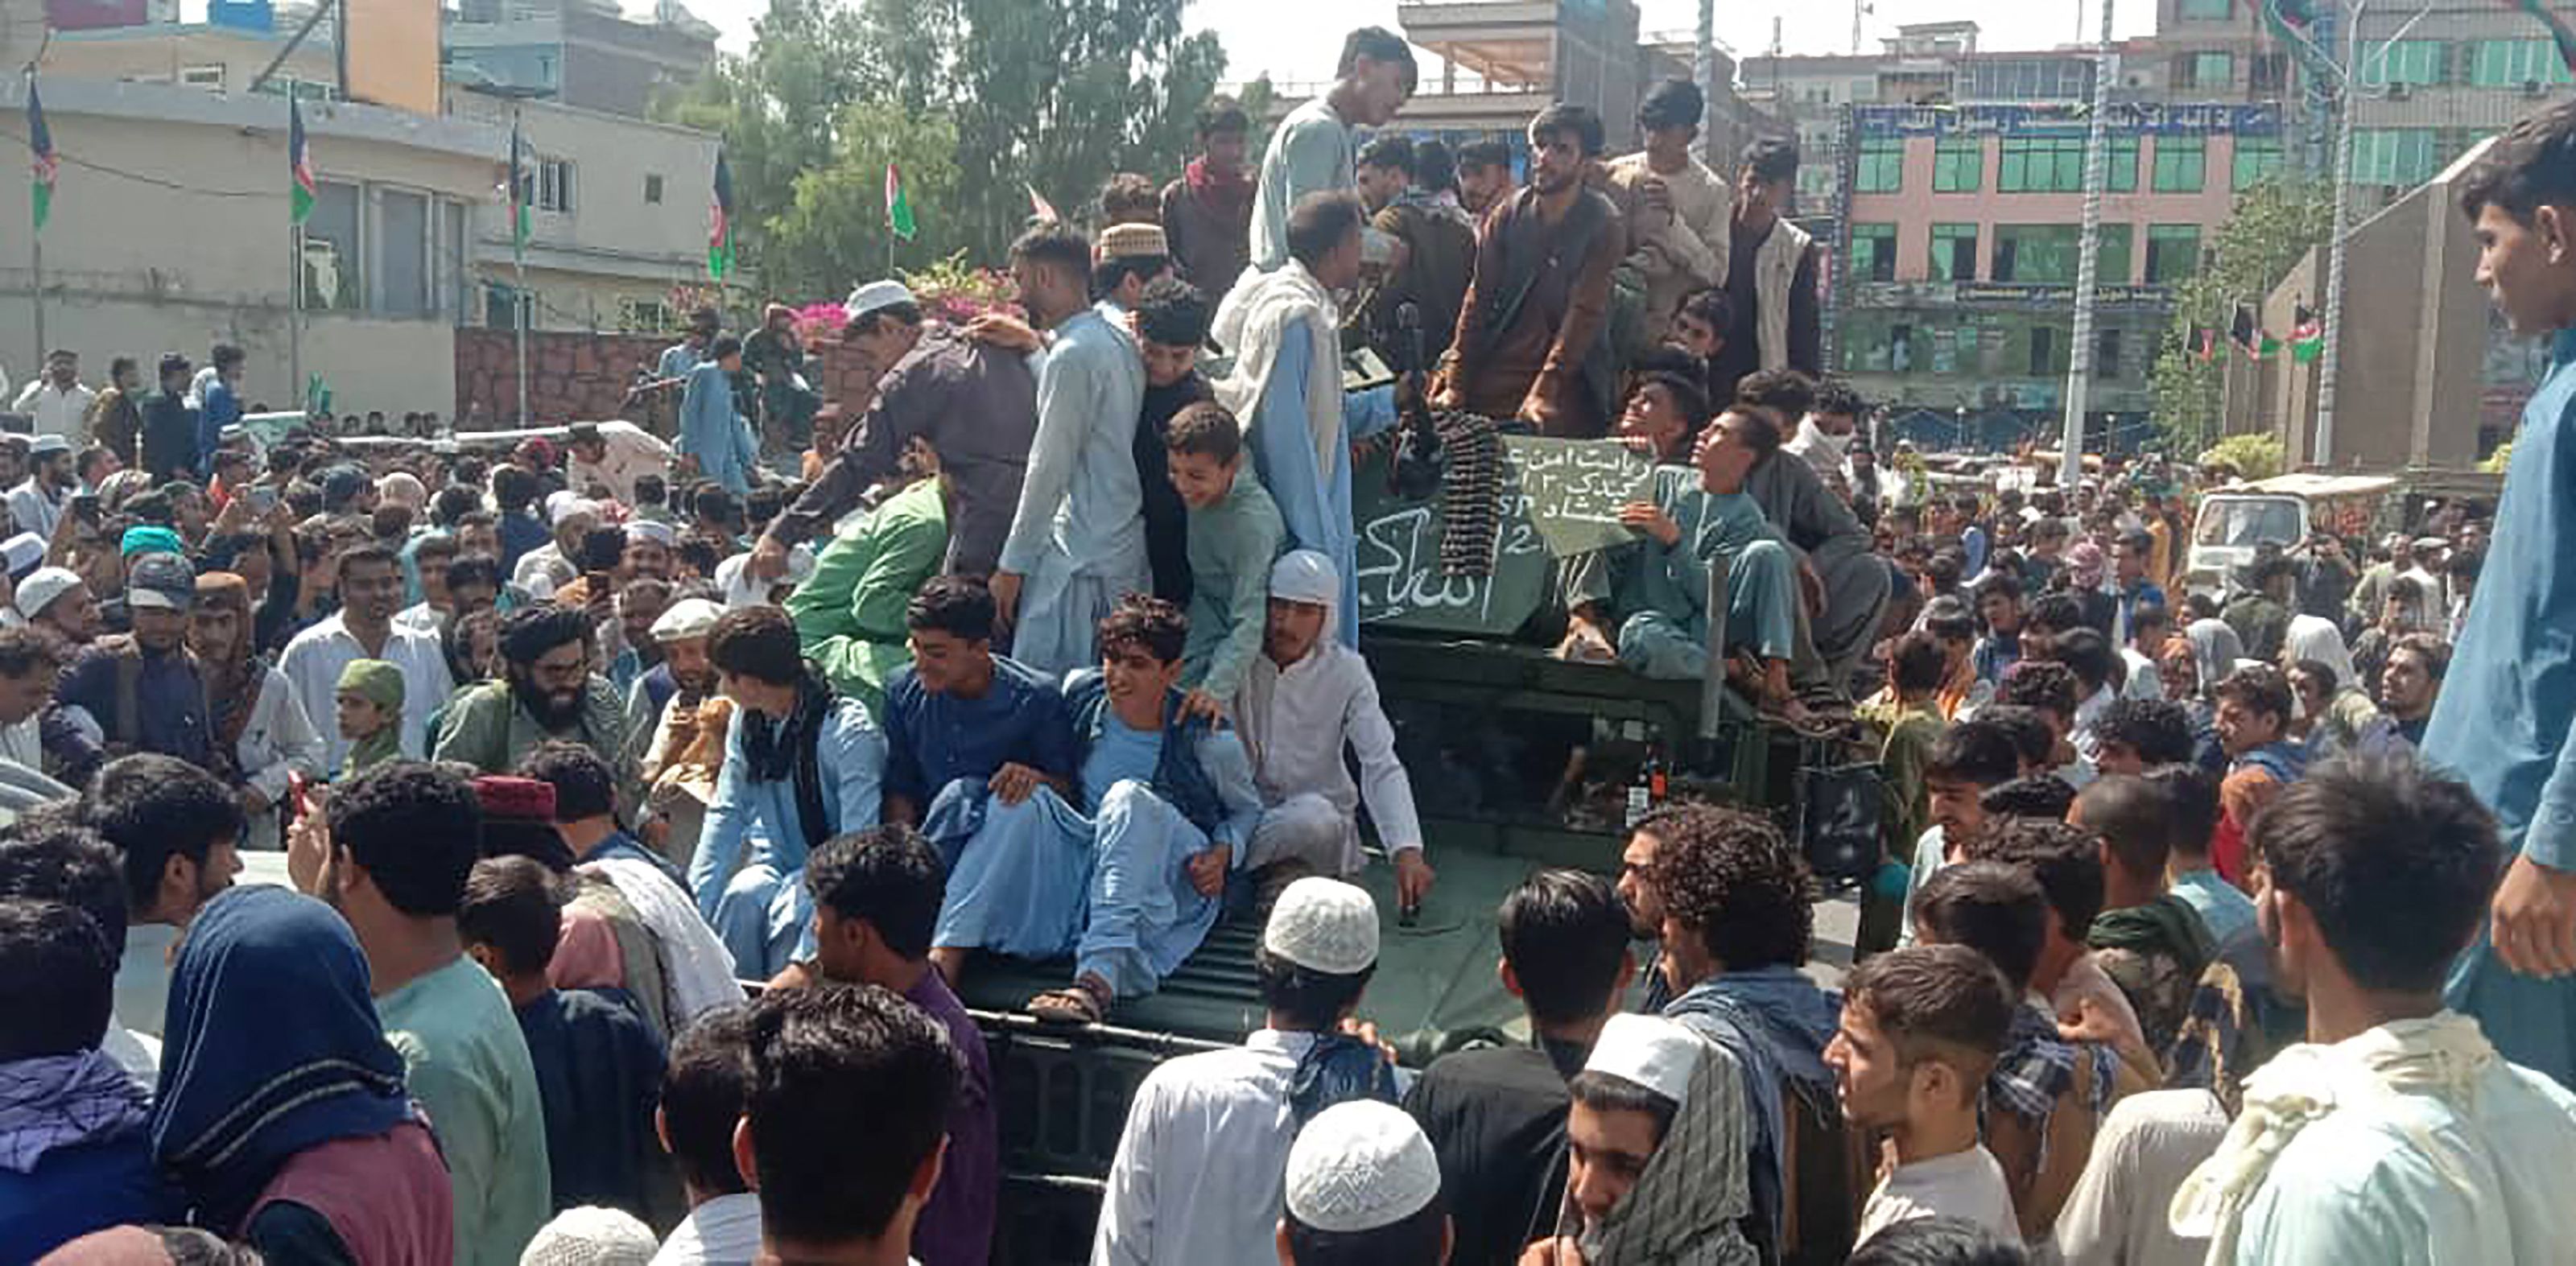 Taliban fighters and local people sit on an Afghan National Army (ANA) Humvee vehicle on a street in Jalalabad province on August 15